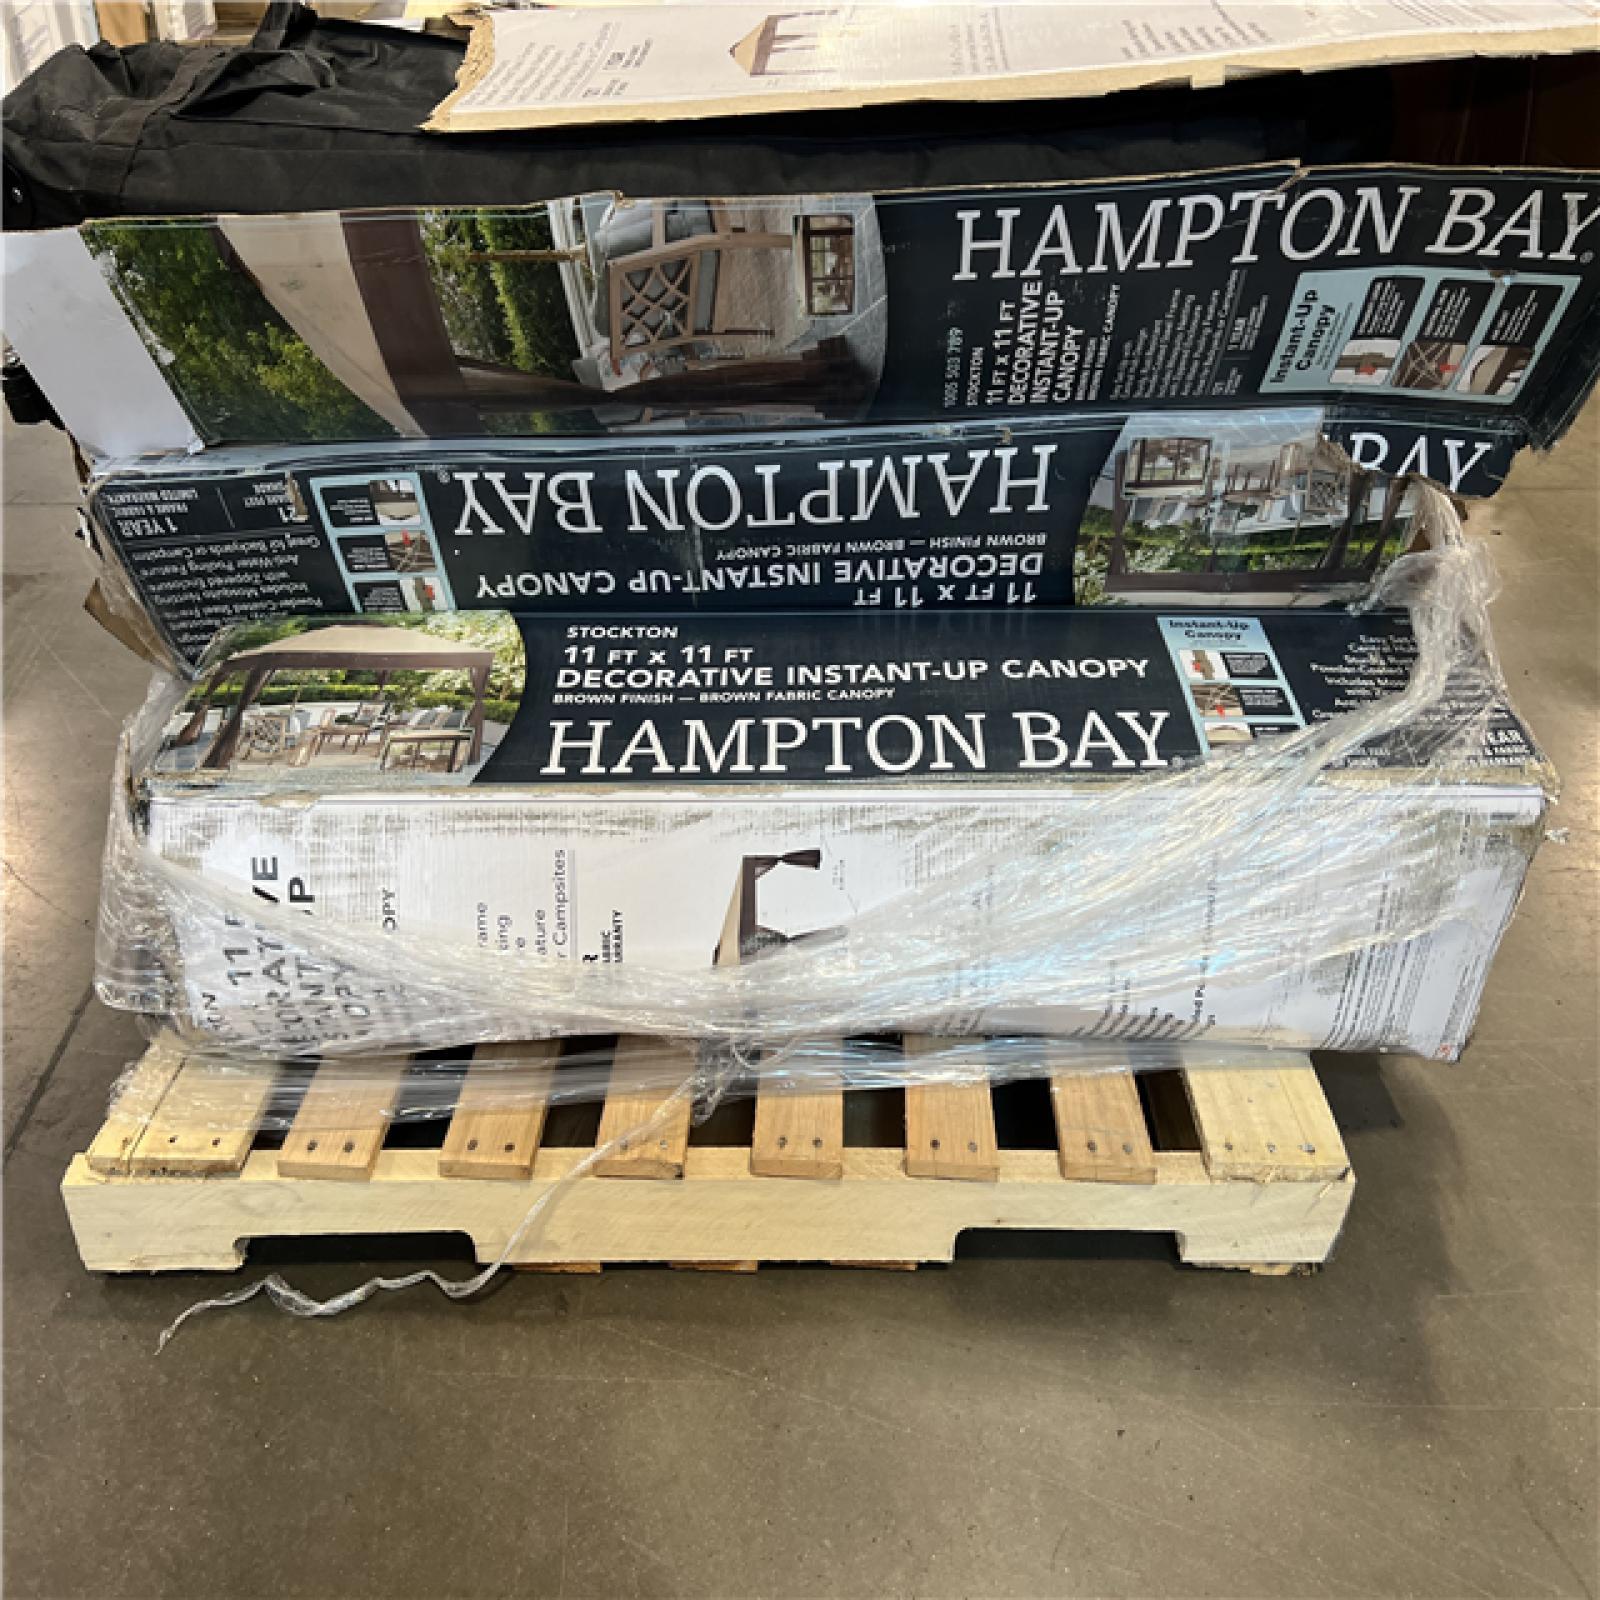 DALLAS LOCATION - Hampton Bay Stockton 11 ft. x 11 ft. Brown Outdoor Patio Pop-Up Canopy with Netting PALLET - (6 UNITS)